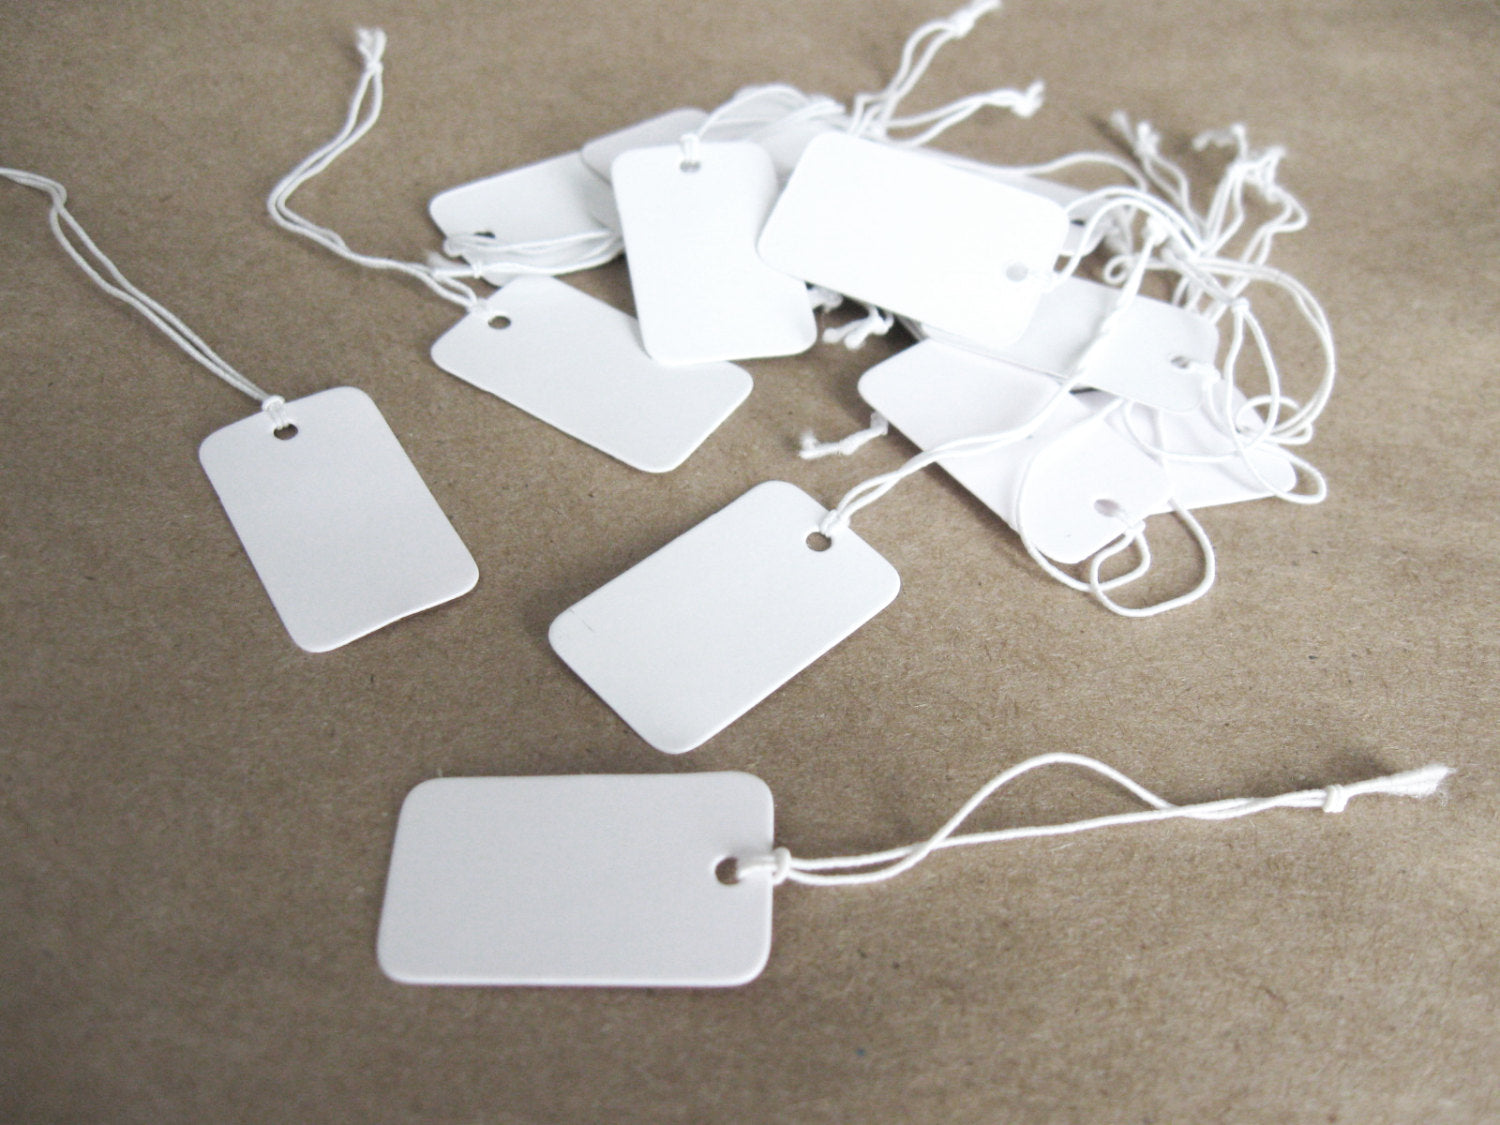 Small White Jewelry Merchandise Tag With White String